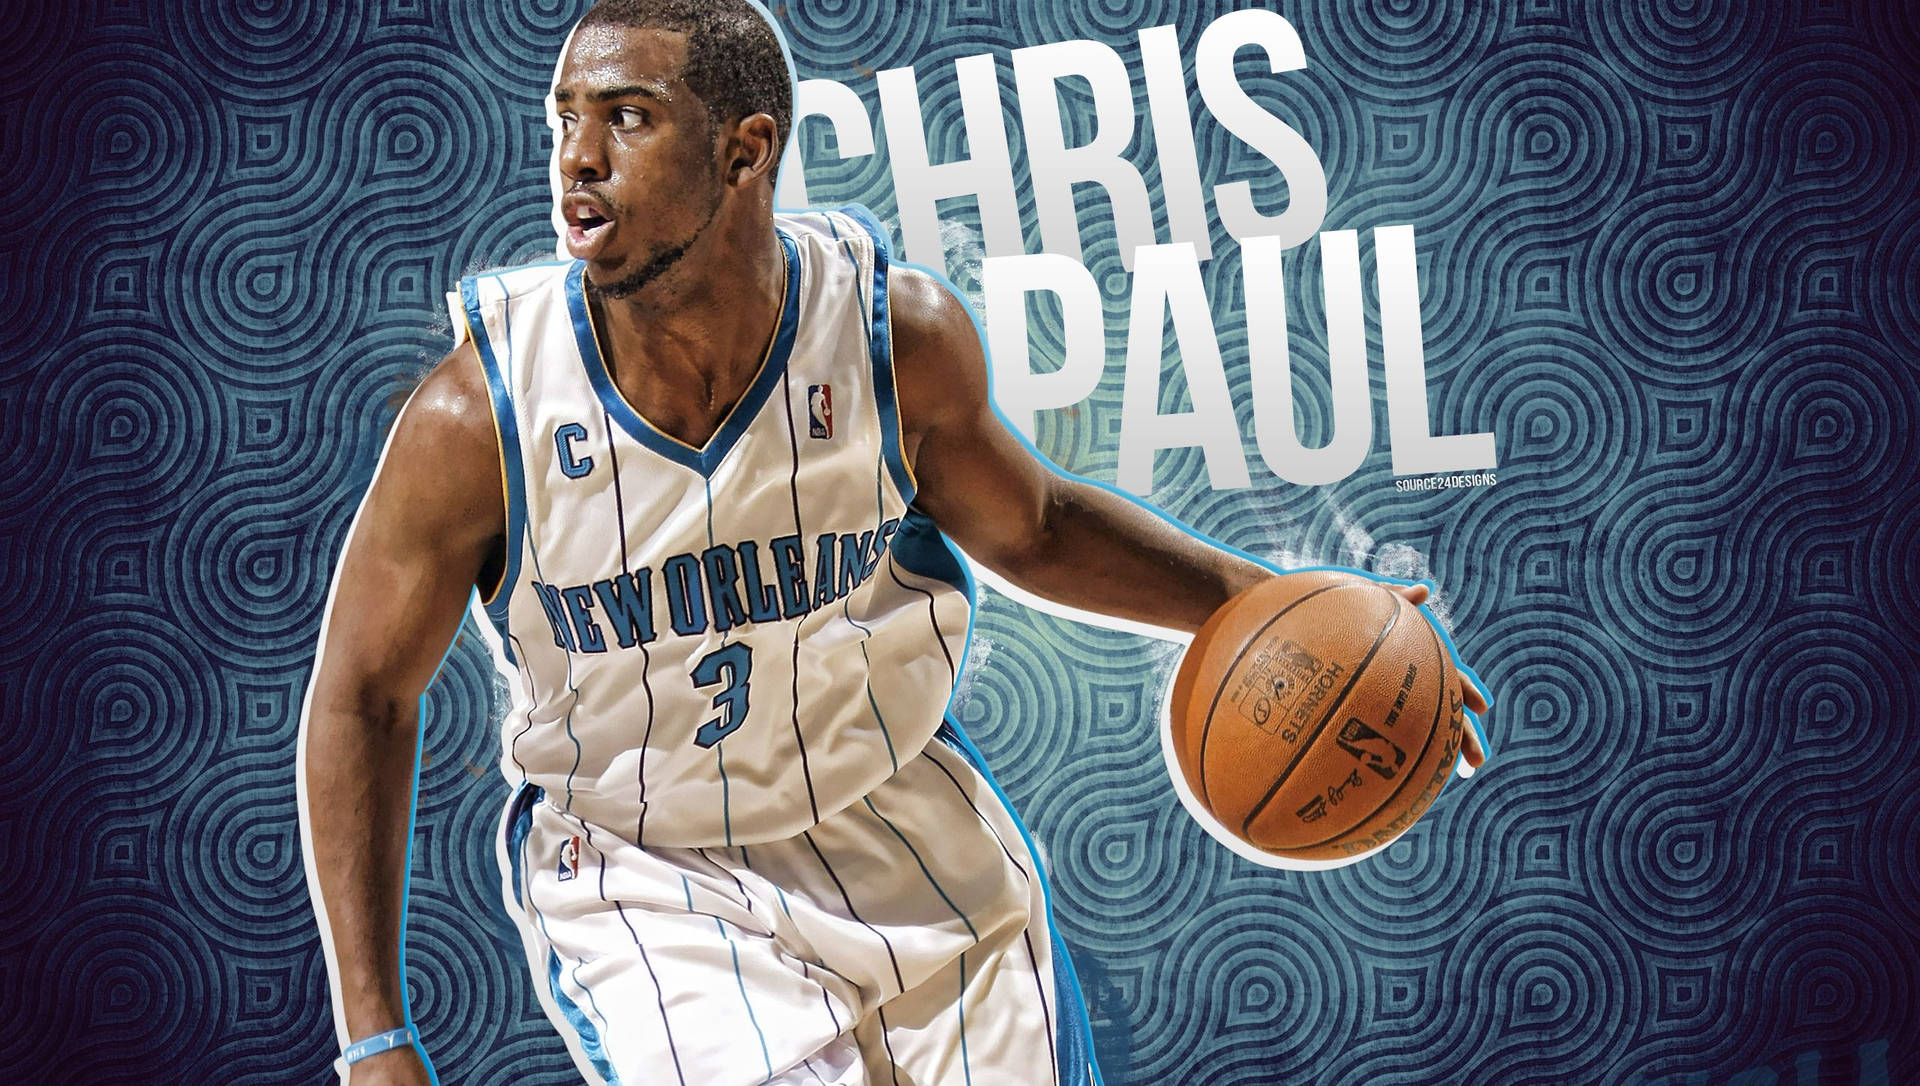 Chris Paul New Orleans Jersey Background